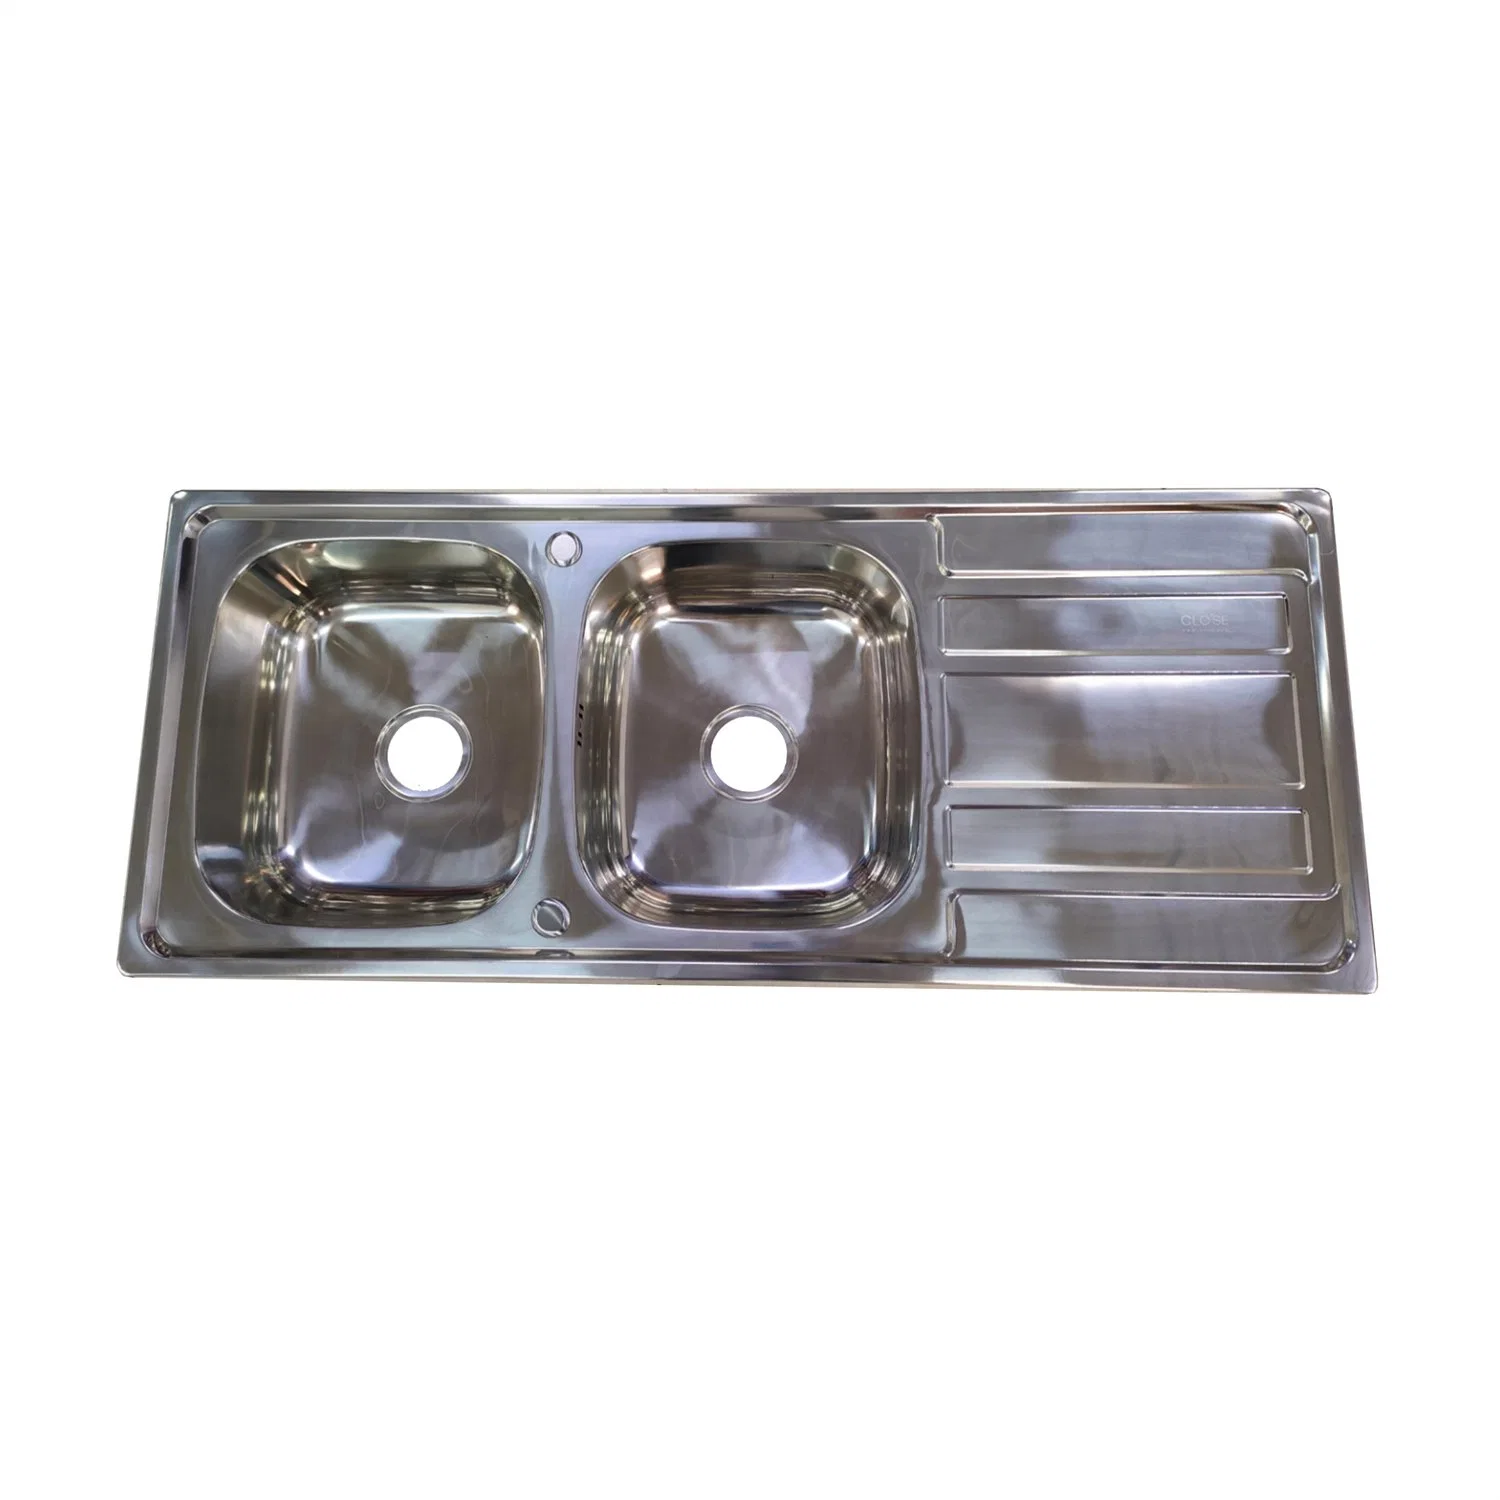 Two Bowls 201 304 Stainless Steel 2023 Quality Kitchen Sink with Board